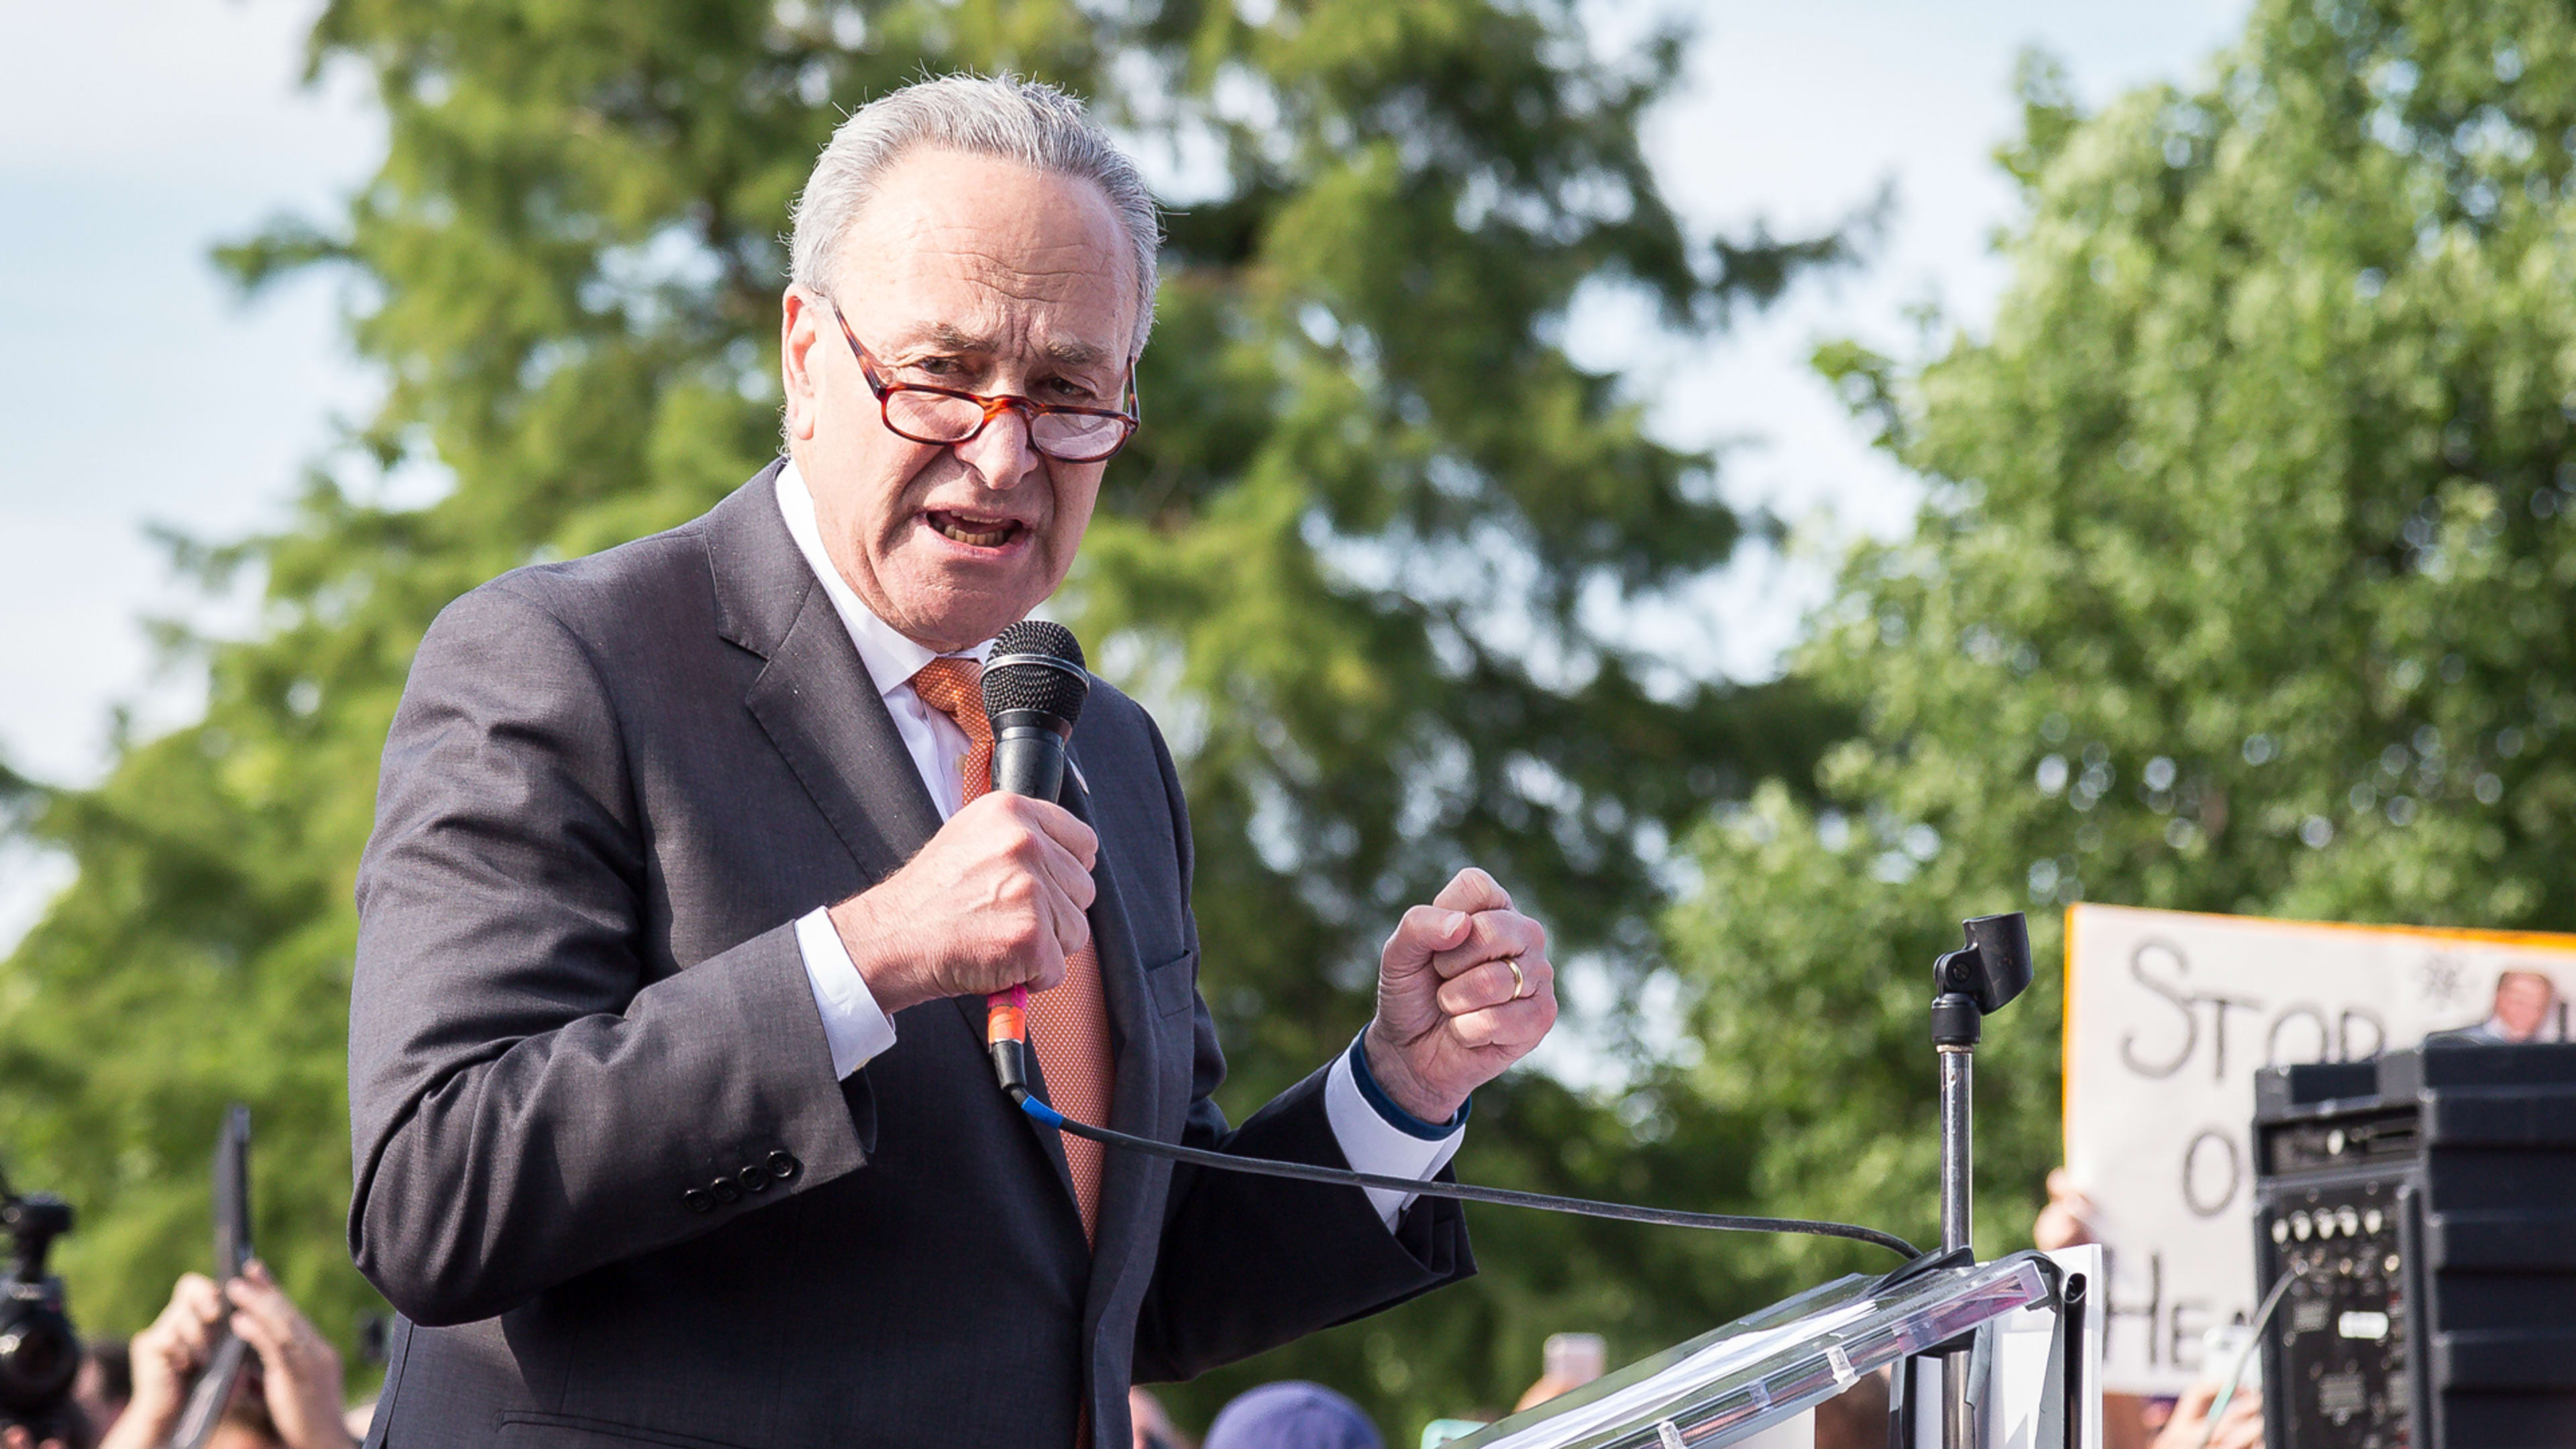 Senator Chuck Schumer: The world would be a “worse place” without Amazon